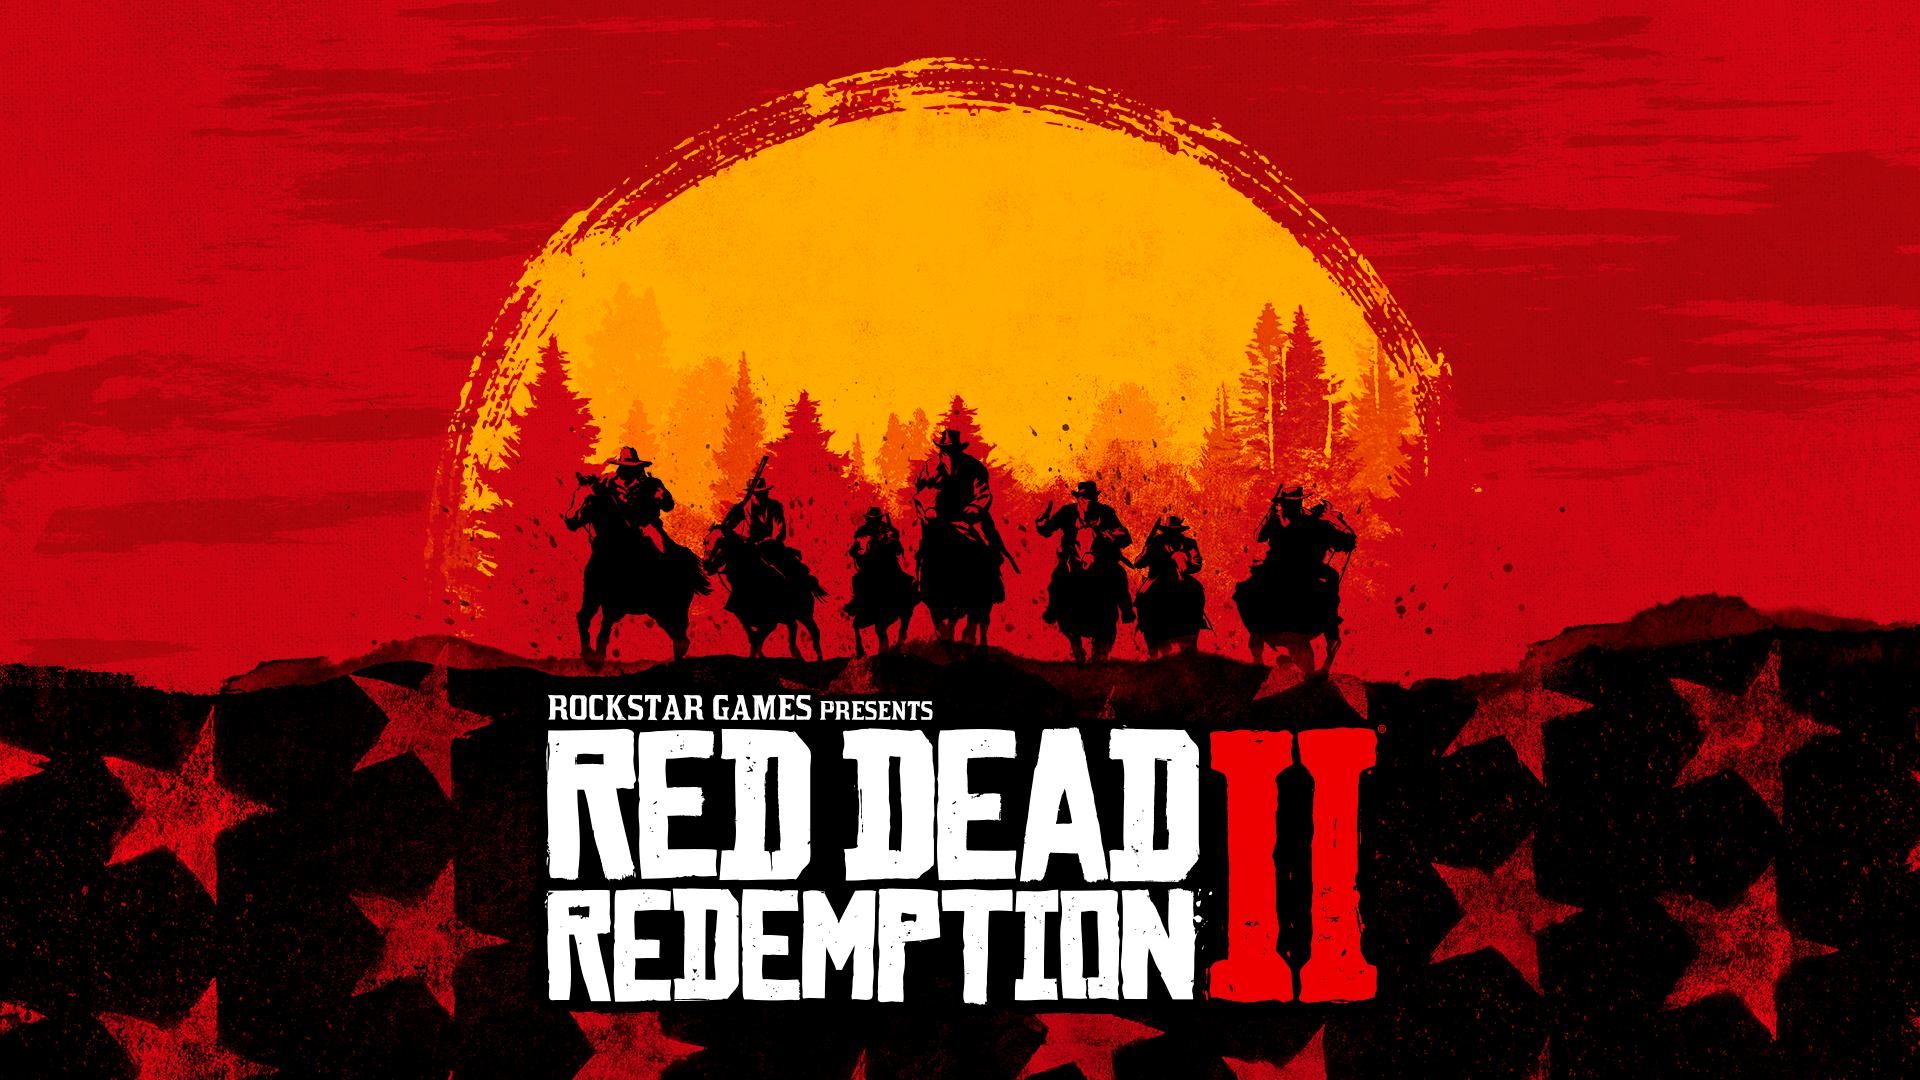 Music in Red Dead Redemption 2